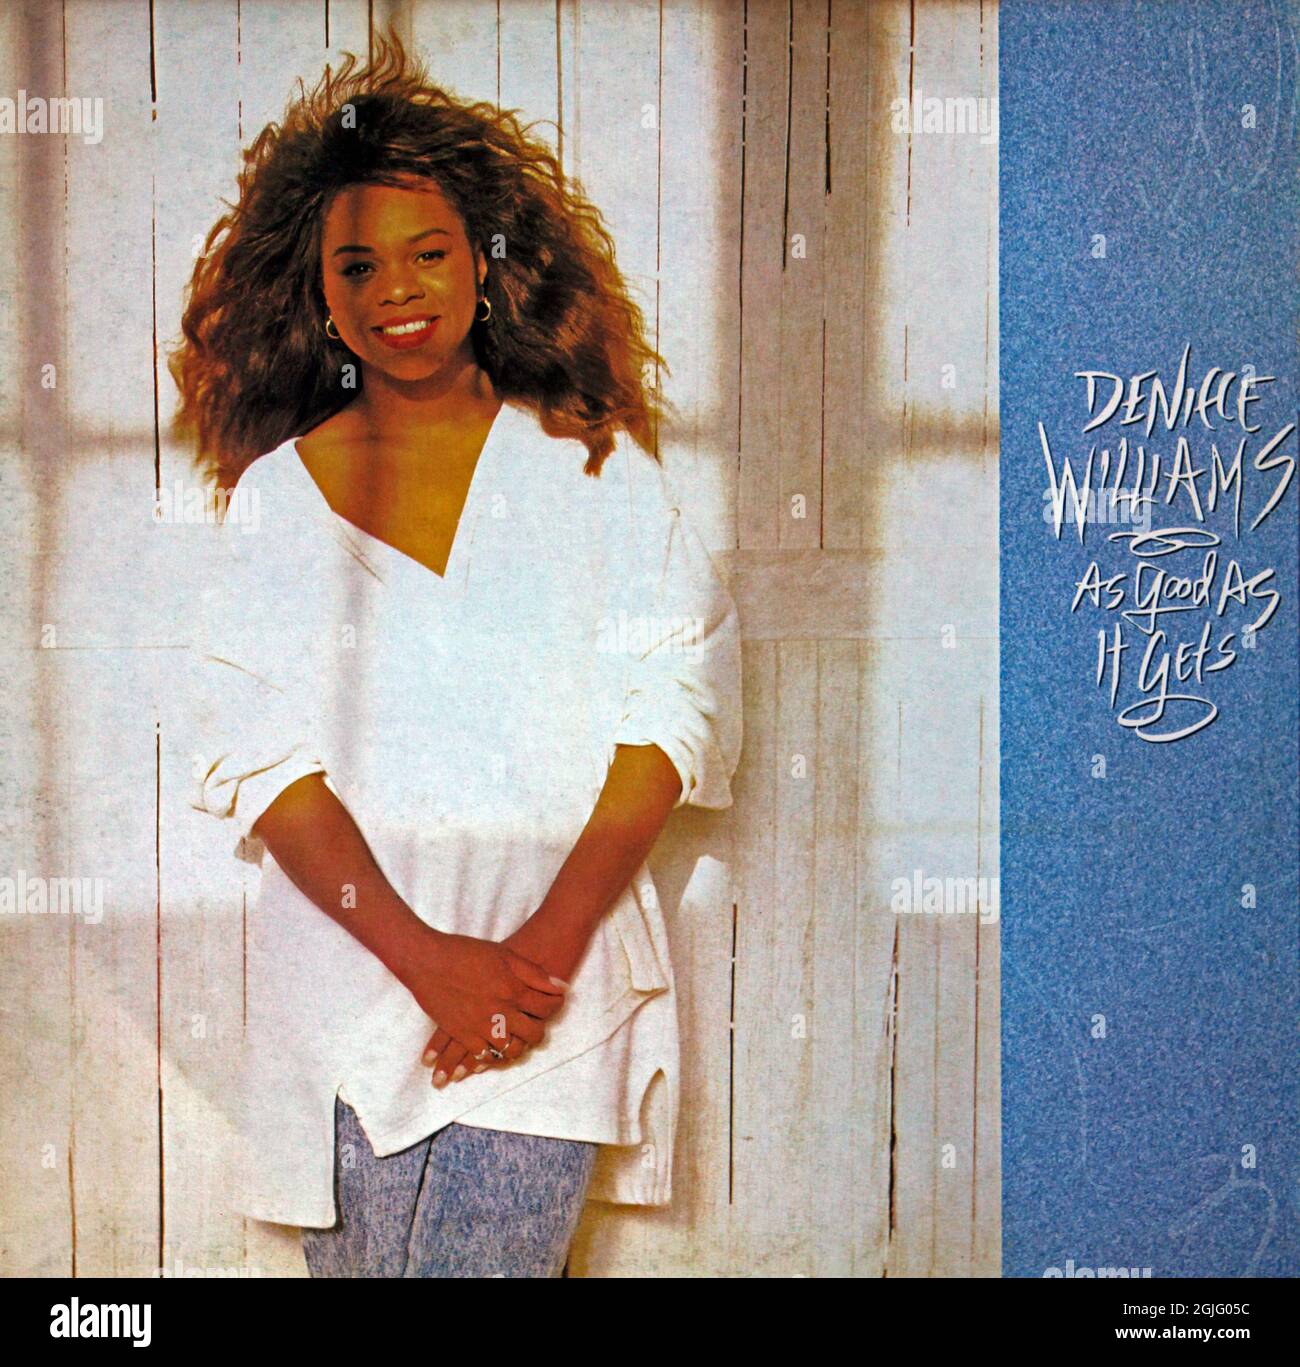 Deniece Williams: 1988. LP front cover : As Good As It Gets Stock Photo